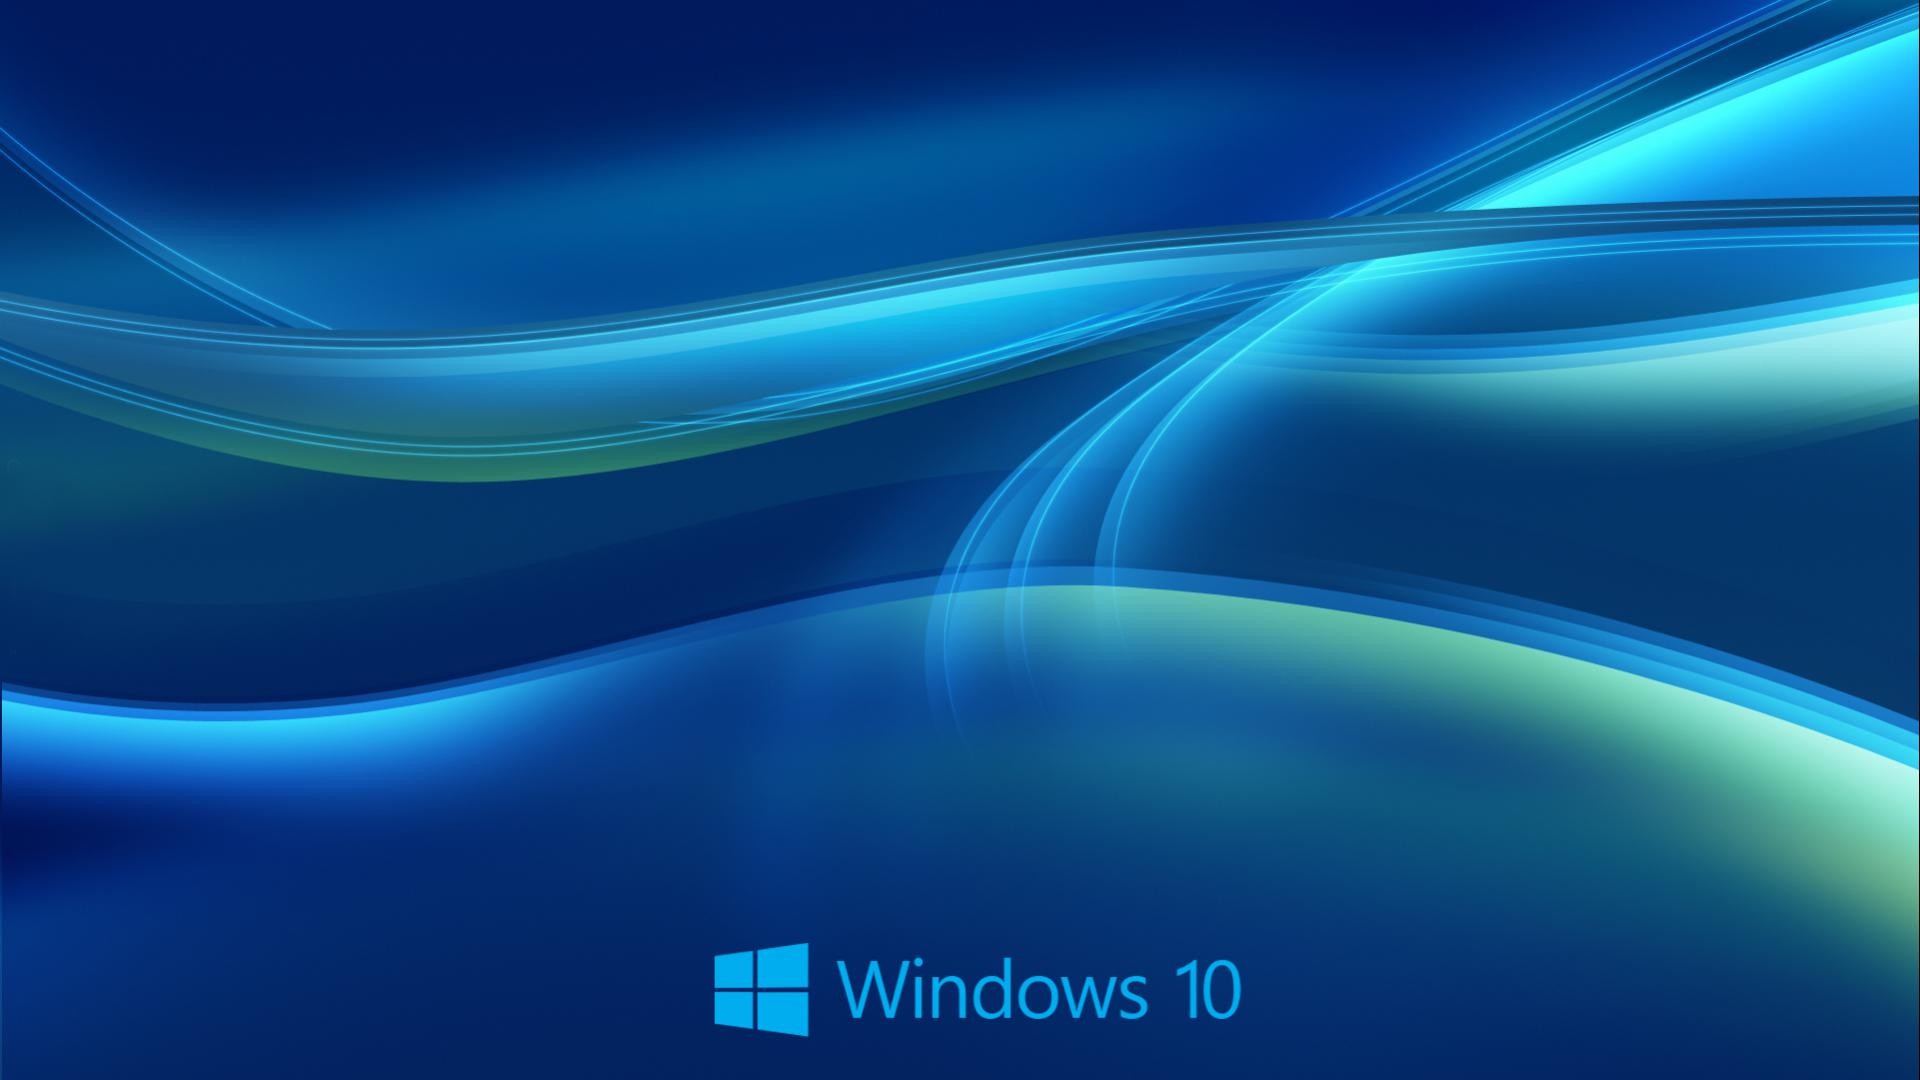 1920x1080 Windows 10 Wallpaper HD in Blue Abstract with New Logo | HD Wallpapers .